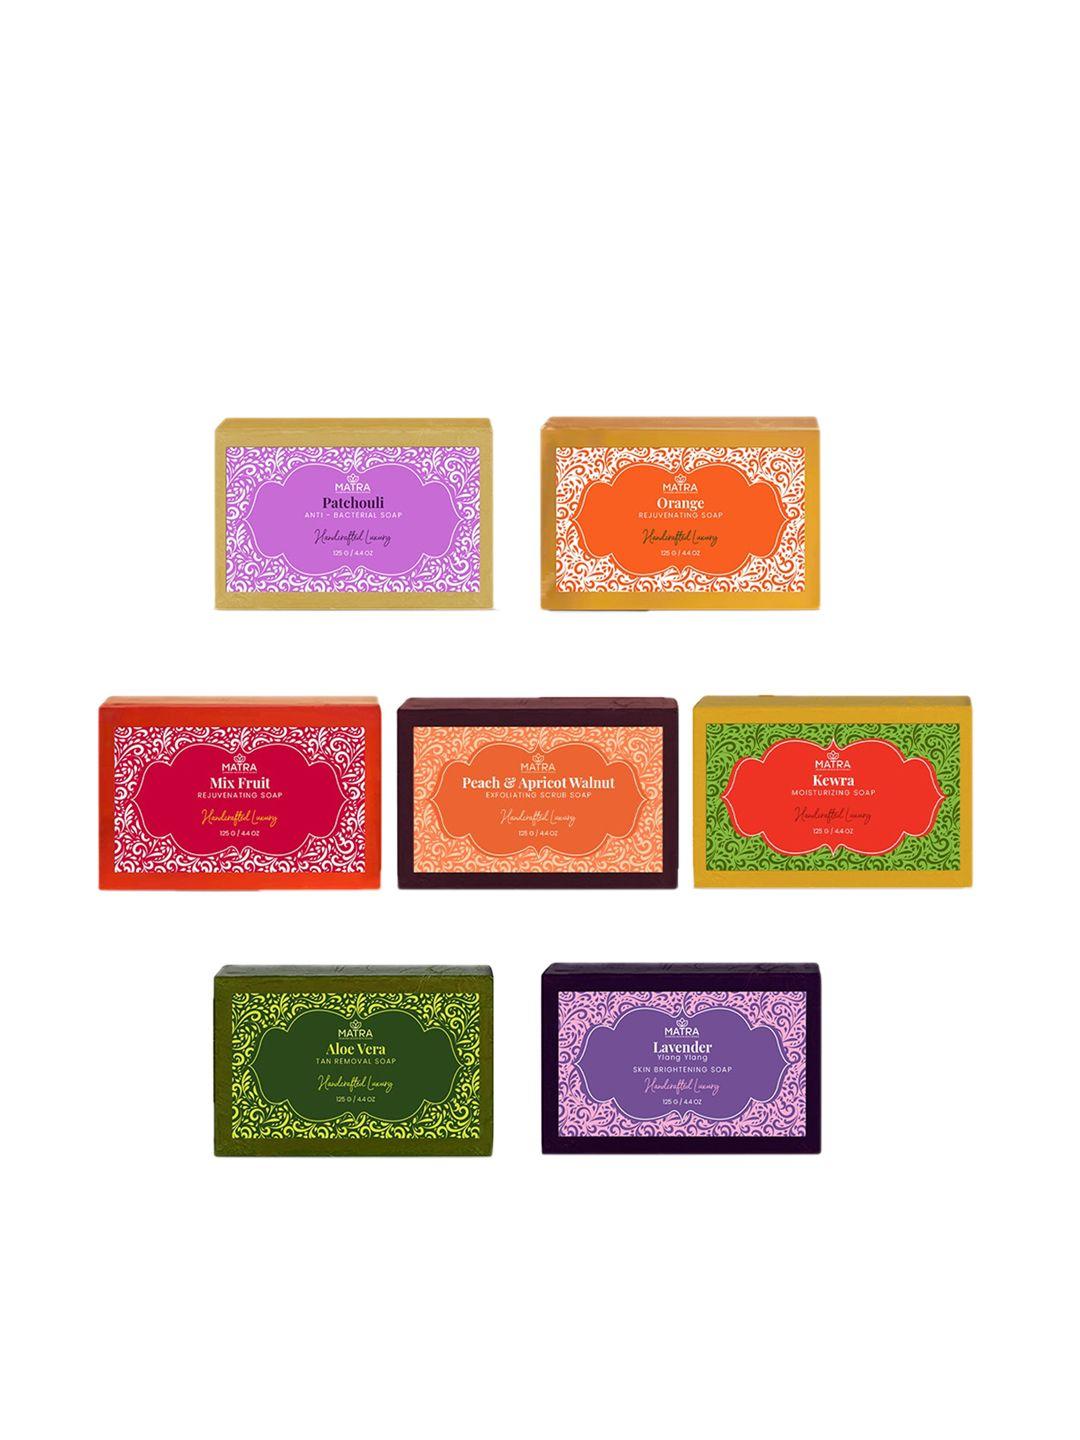 matra set of 7 handcrafted luxury natural bathing soaps 125g each